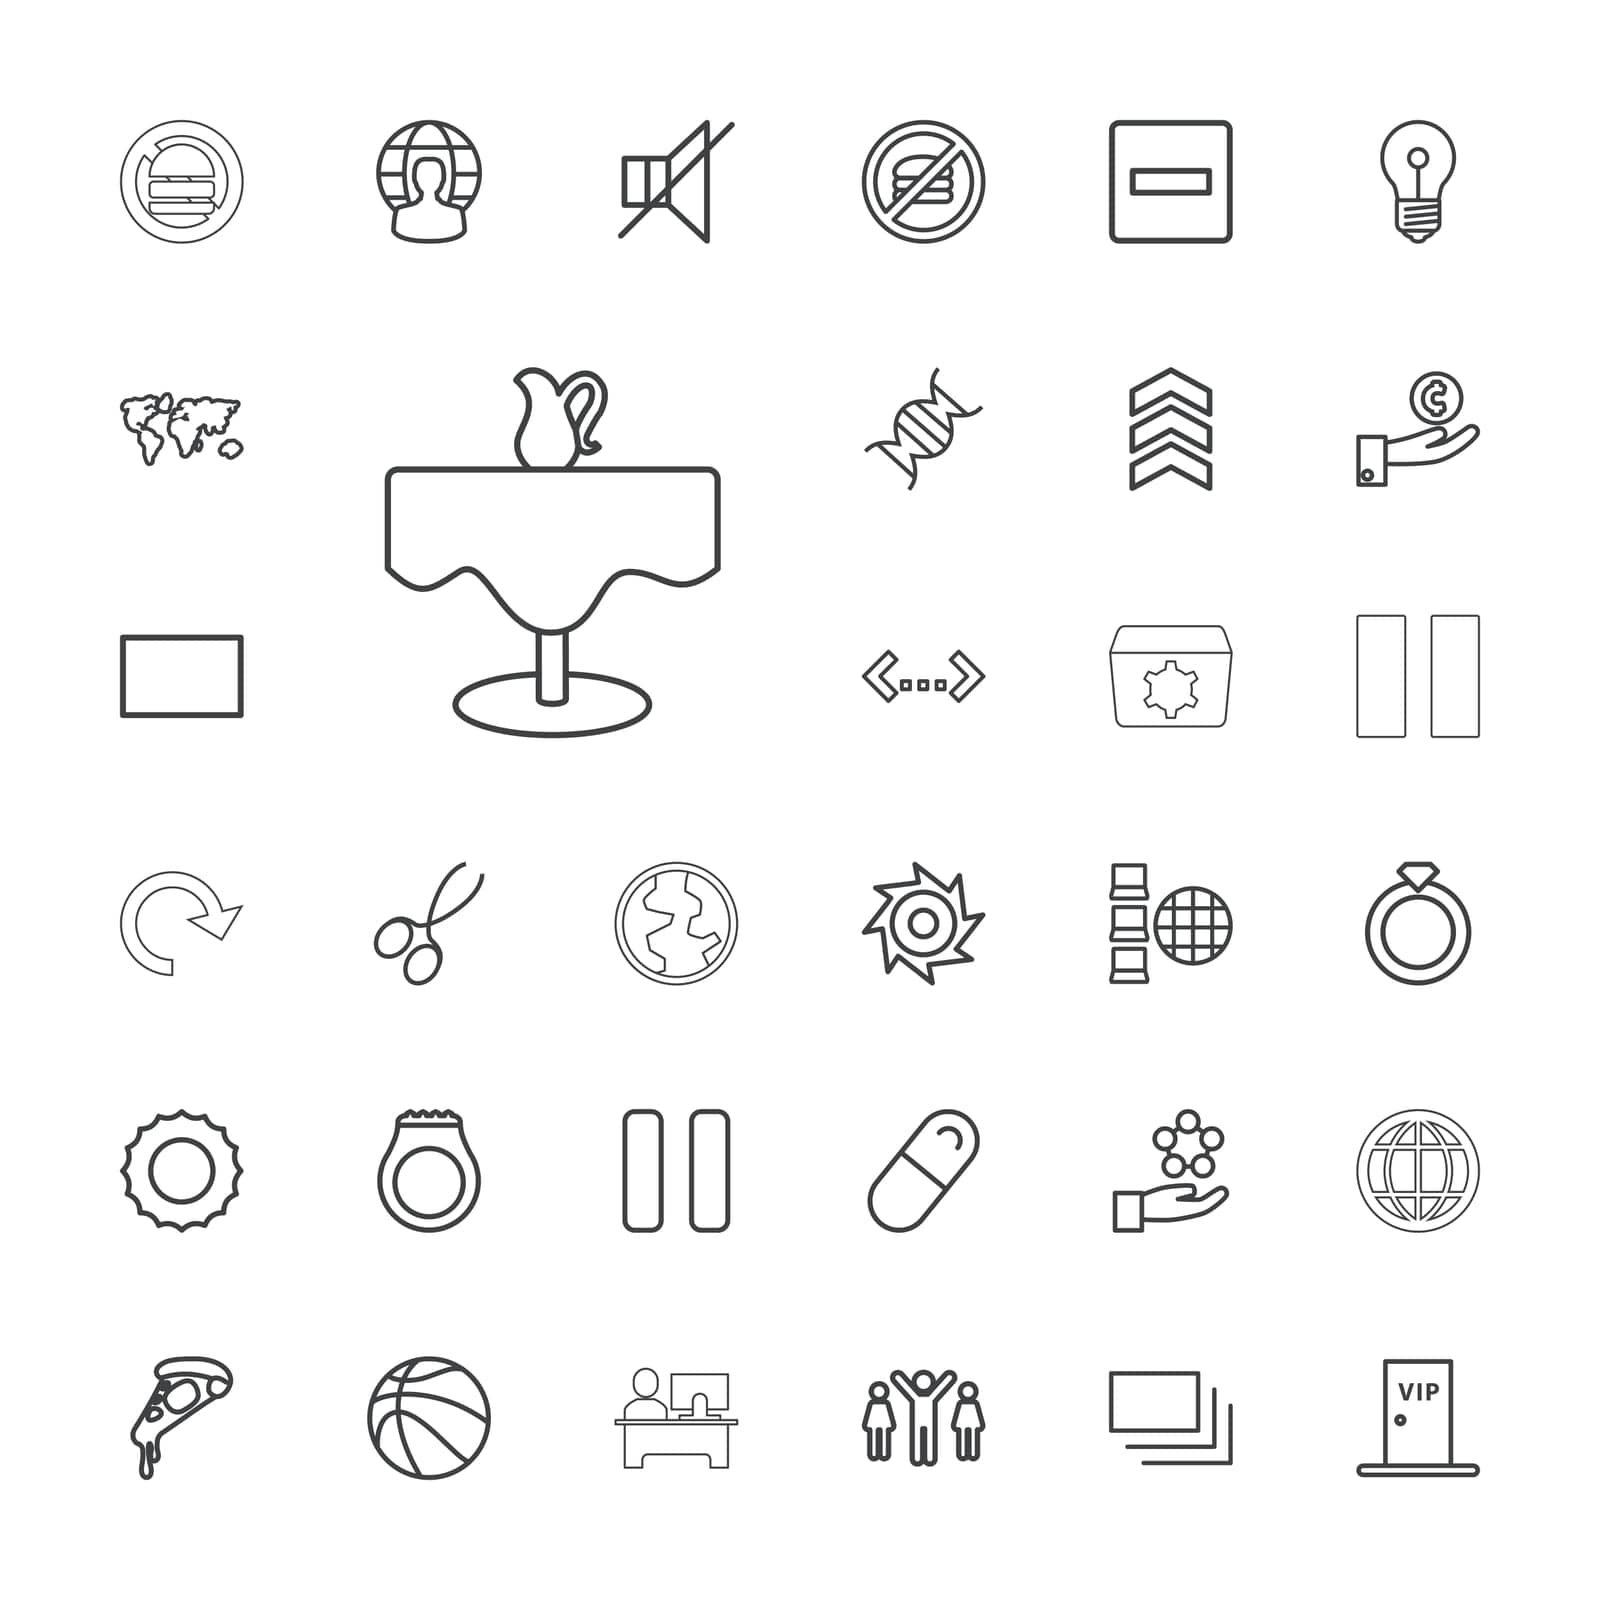 no,minus,arrow,ring,sound,icon,sun,pill,basketball,world,reload,pizza,dna,vector,celebrating,map,table,hand,on,set,in,restaurant,victory,saw,food,pause,scissors,keyhole,fast,globe,round,burst,manicure,atom,user,quotation,internet,coin,gear by ogqcorp